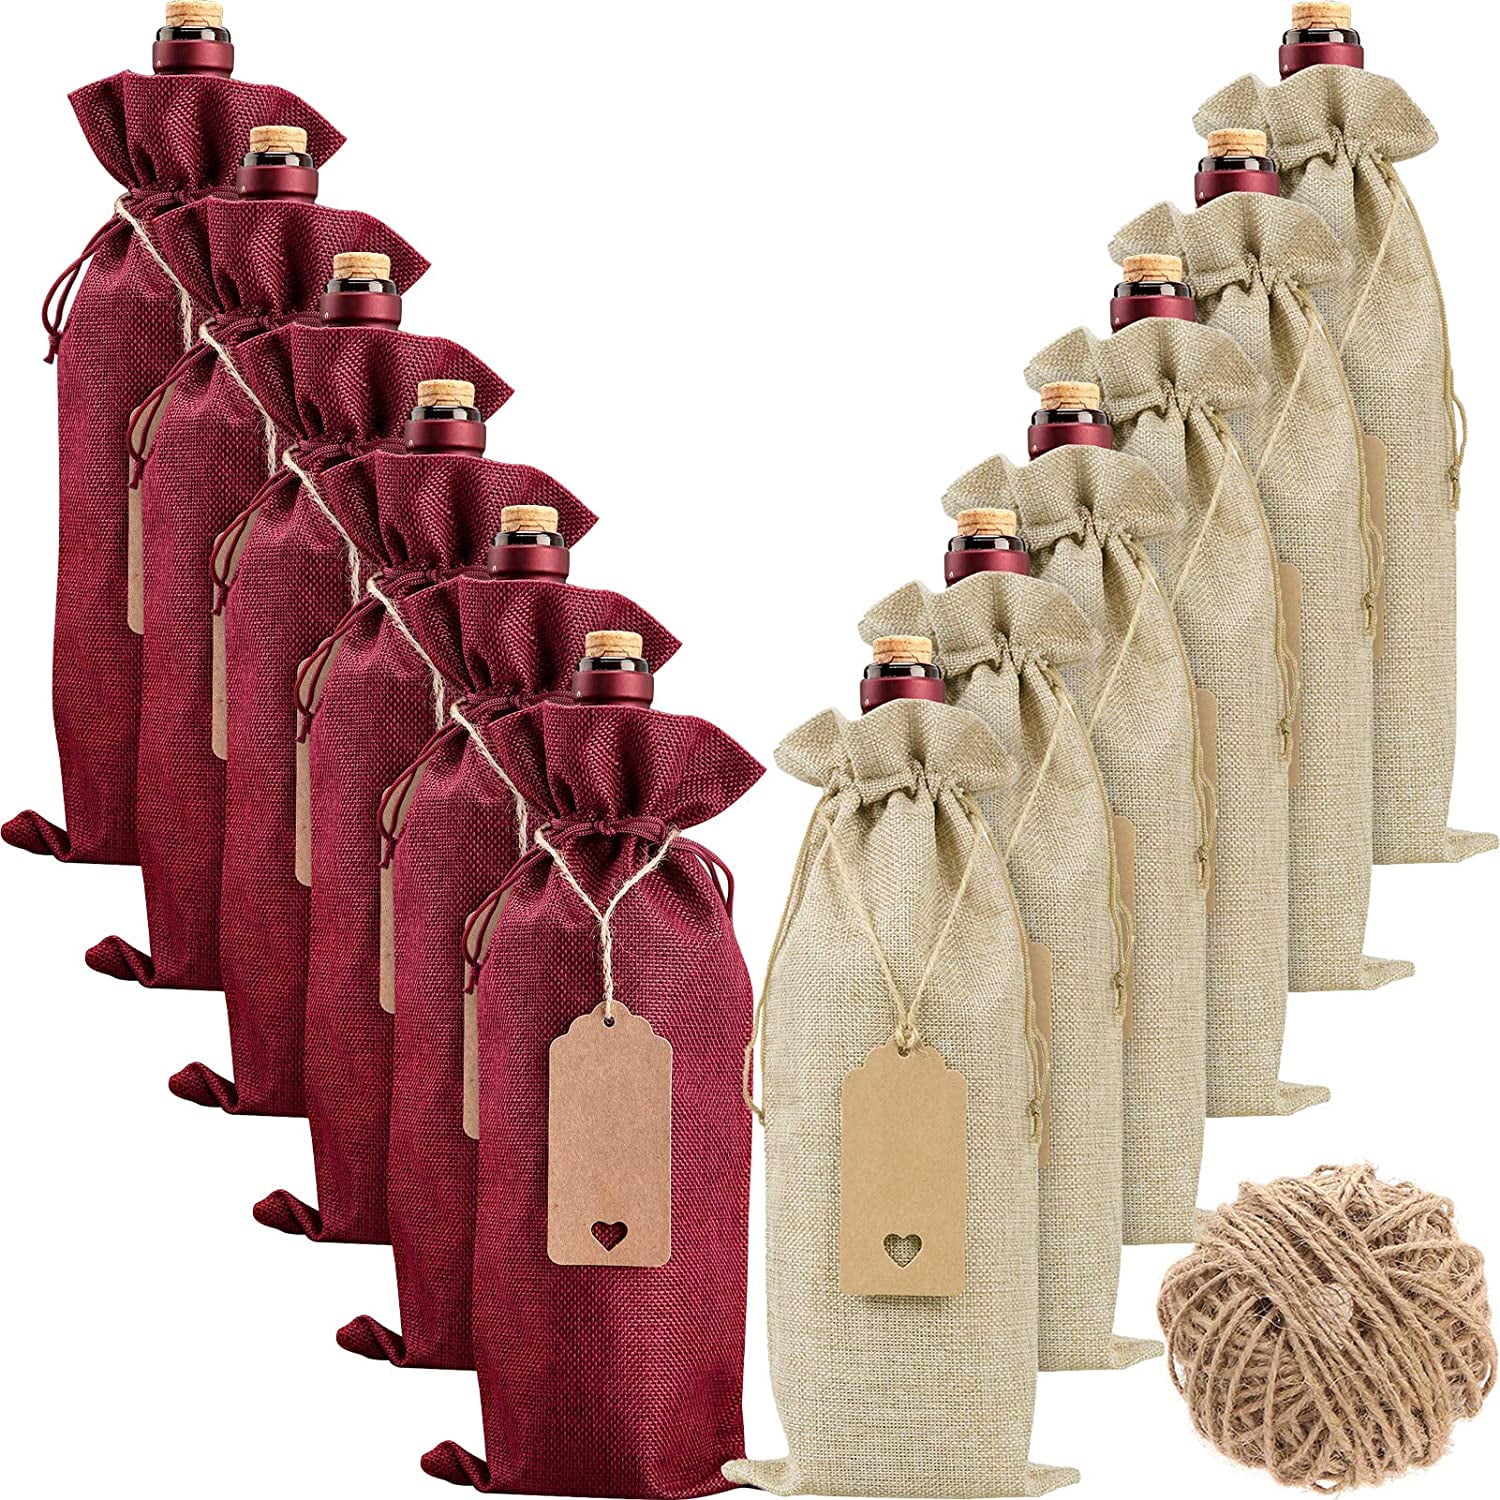 Burlap Wine Gift Bags 12pcs Burlap Bottle Wine Bags Reusable Jute Wine Bags for Christmas Wedding Travel Birthday Holiday Party 